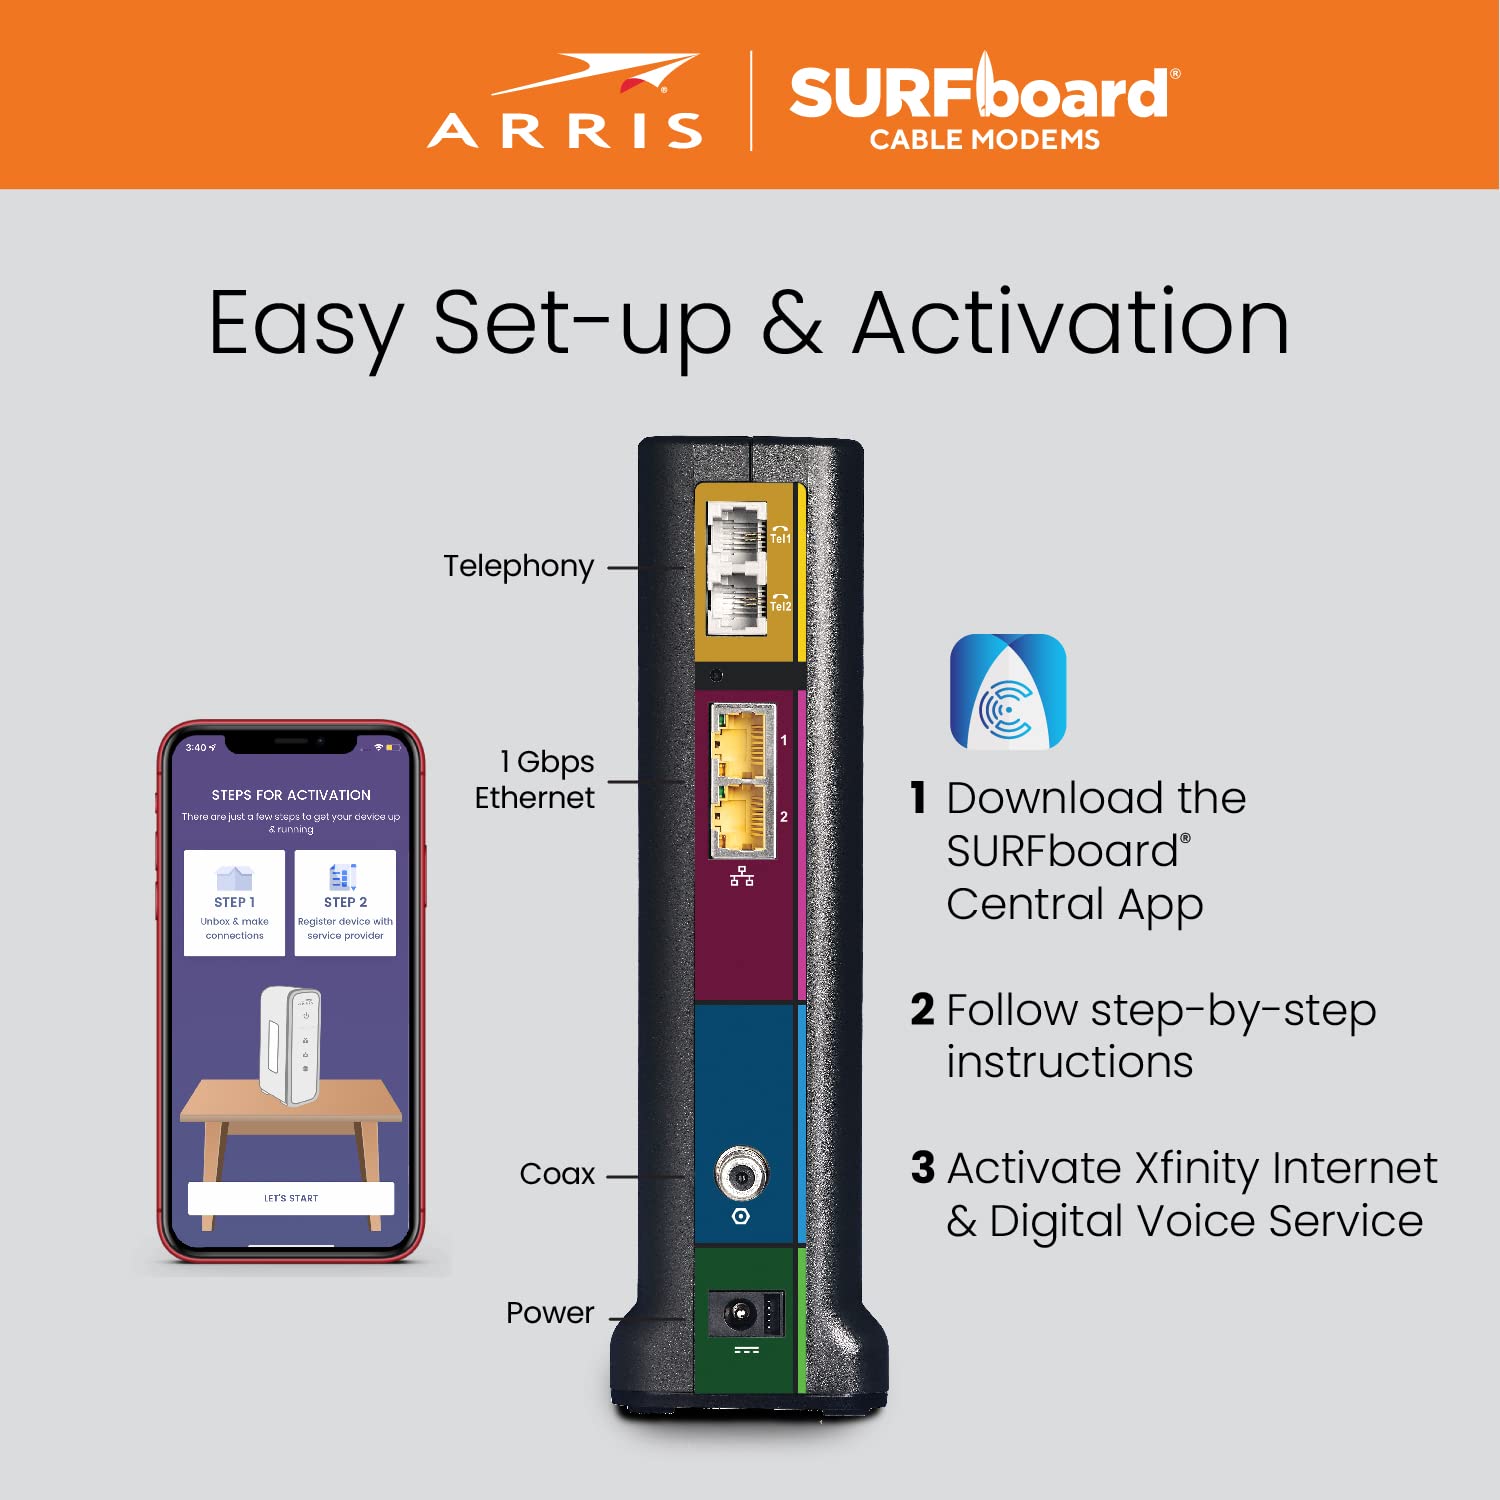 ARRIS SURFboard T25 DOCSIS 3.1 Gigabit Cable Modem | Comcast Xfinity Internet & Voice | Two 1 Gbps Ports | 2 Telephony Ports | 800 Mbps Max with Xfinity Internet Plans | 2 Year Warranty Black